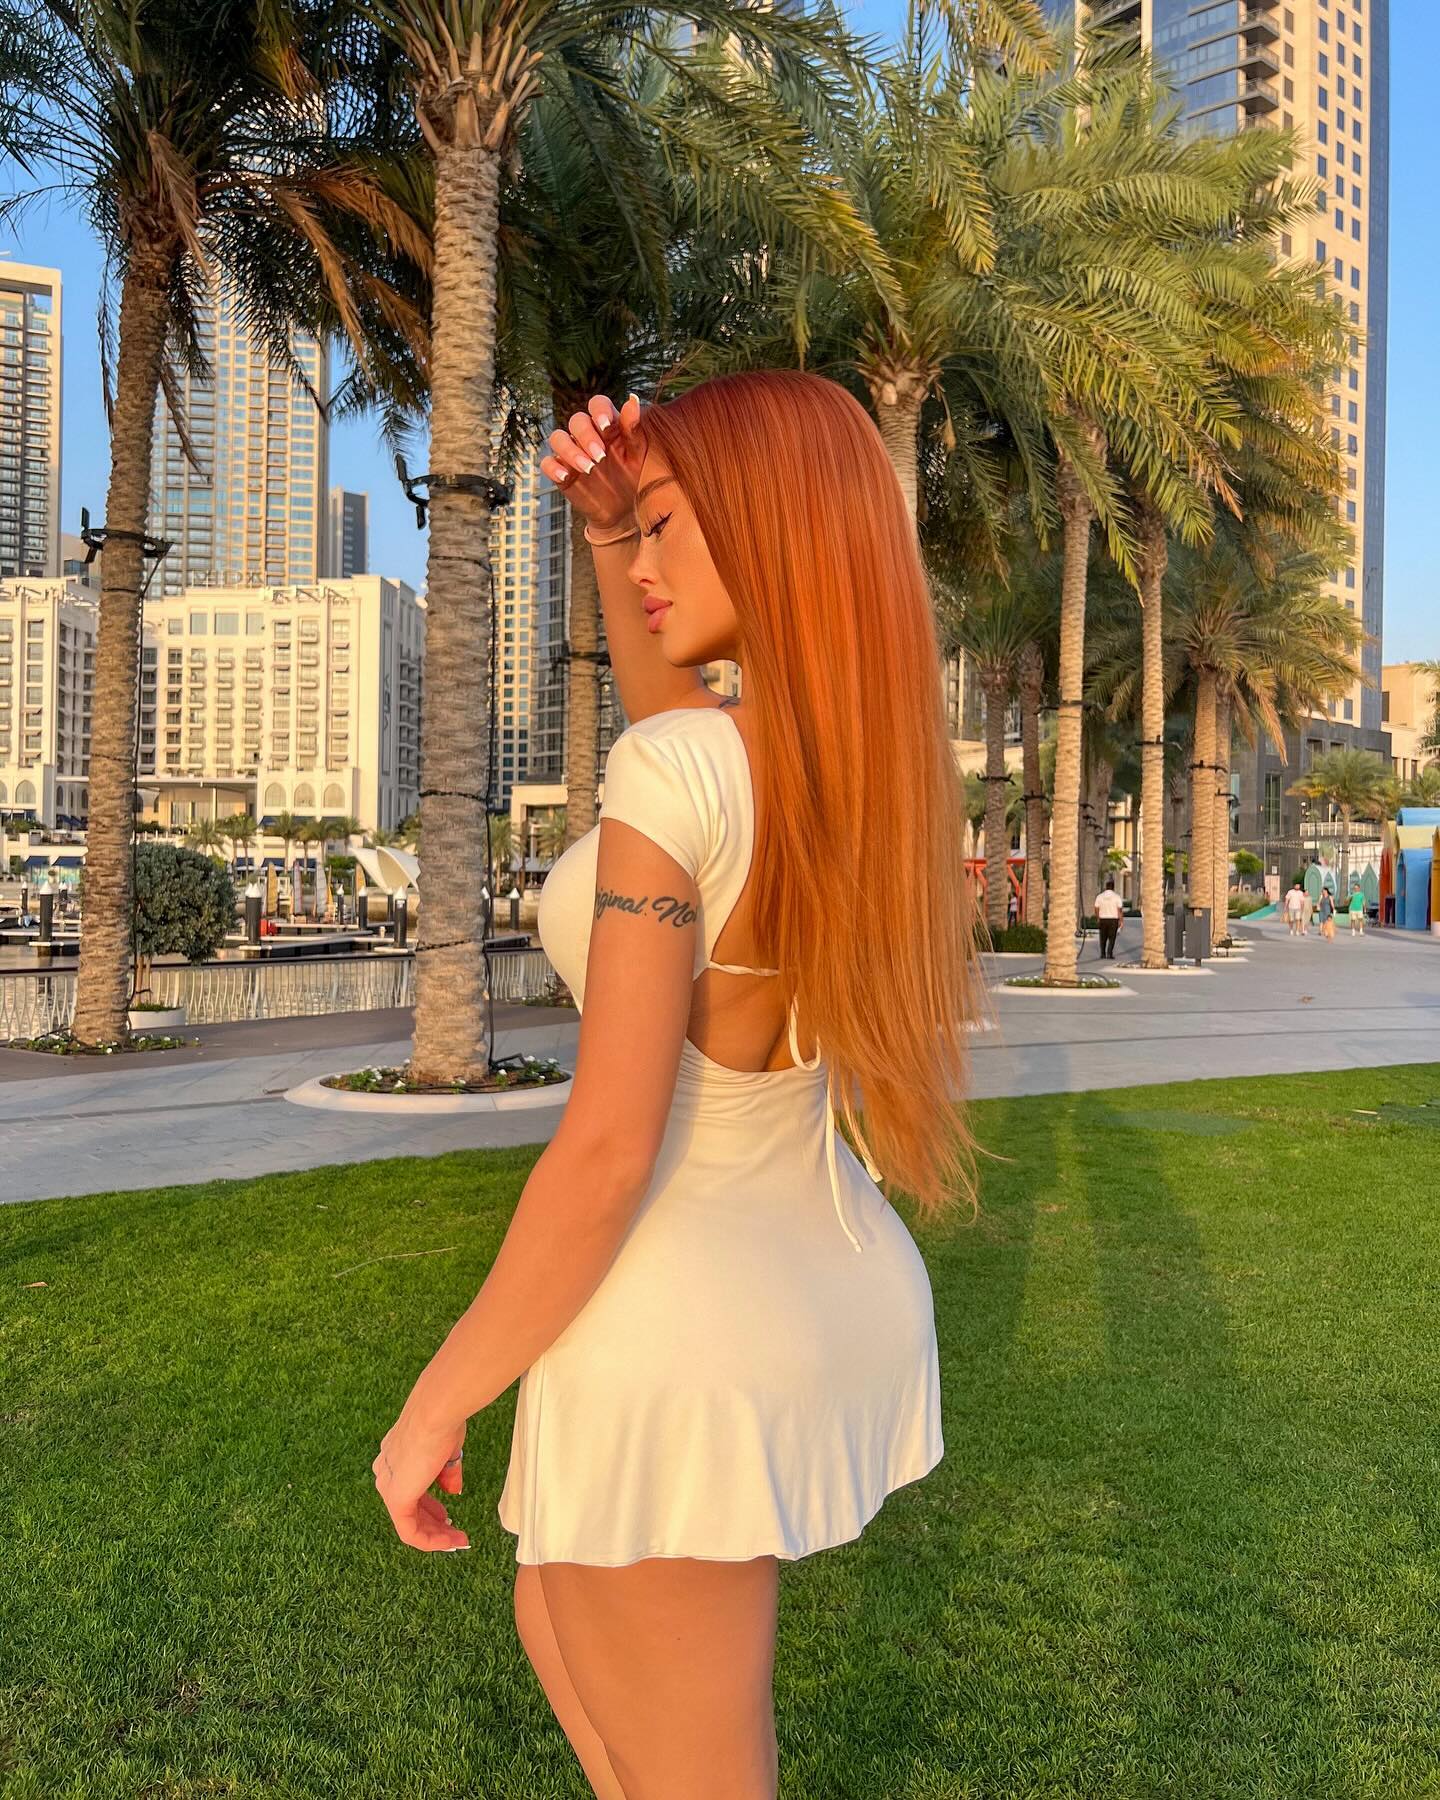 Everyone remembers the girl with the red hair✨
Lovely Dress from @ohpolly | Ad

#redheadgirl #ohpollydress #fashionootd